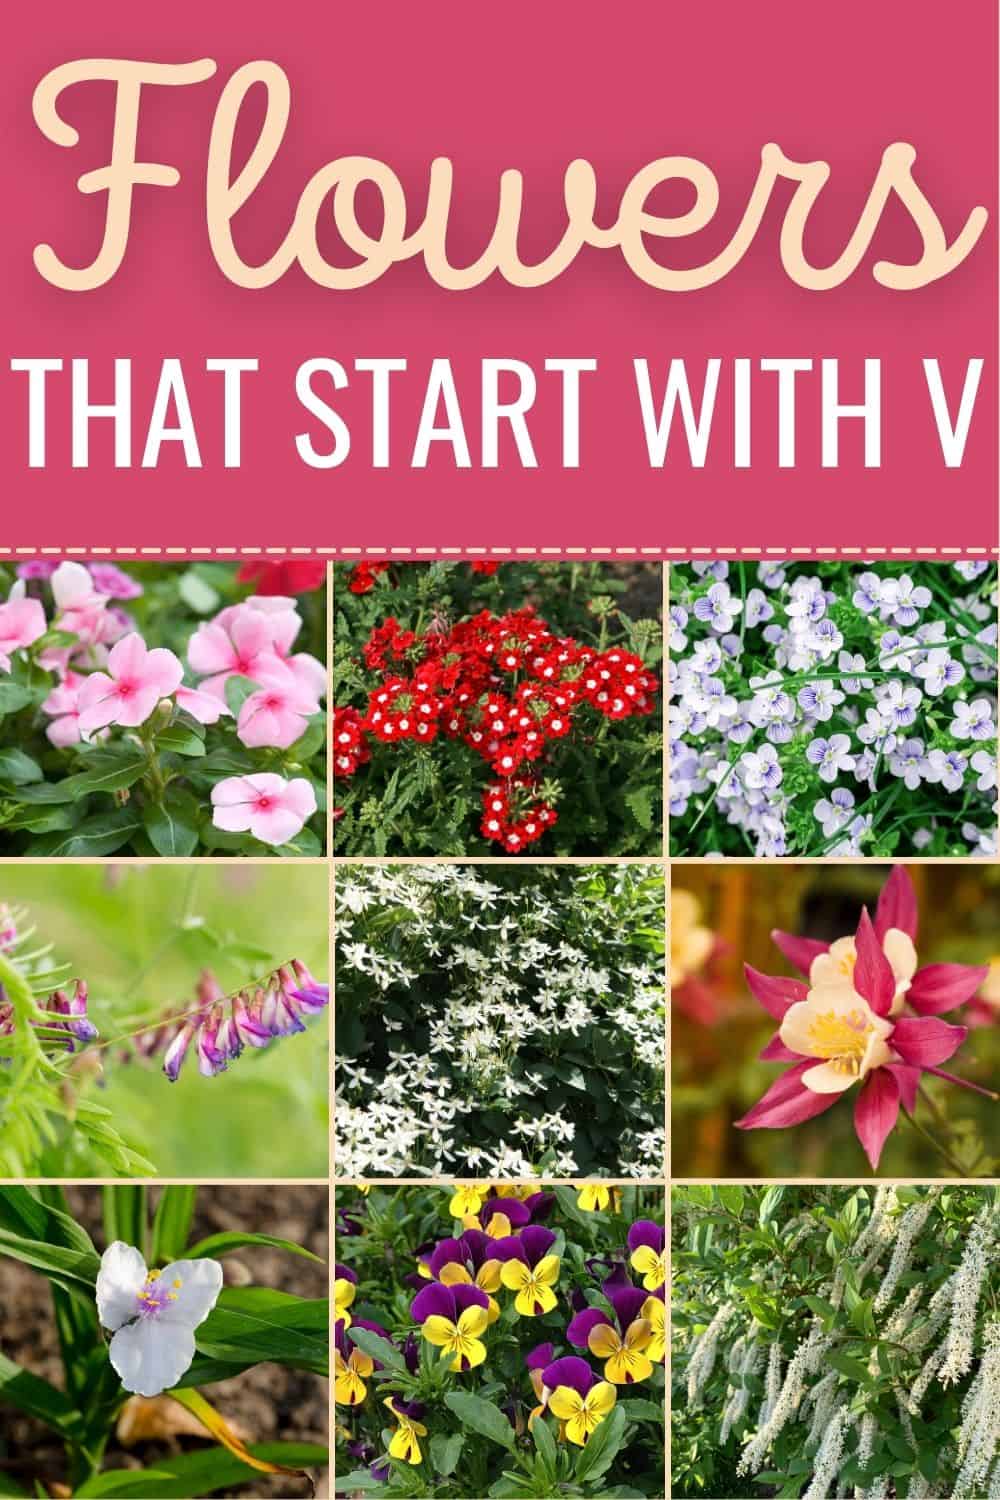 Flowers that start with V